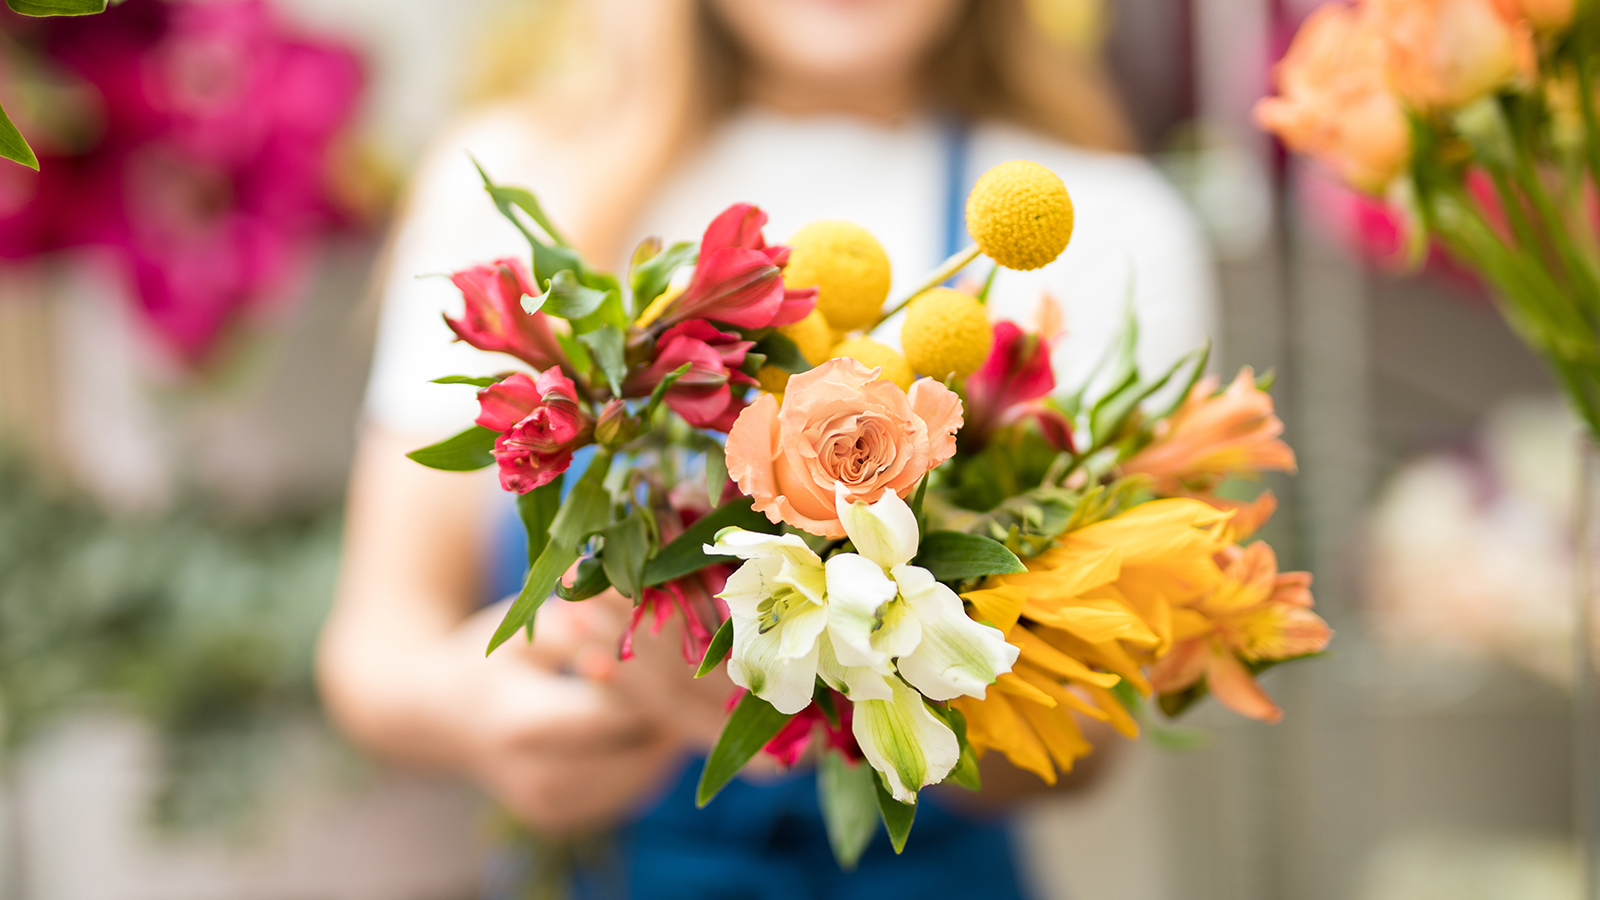 Proud woman showing her florist skills holding a colorful natural bouquet. Seen up close